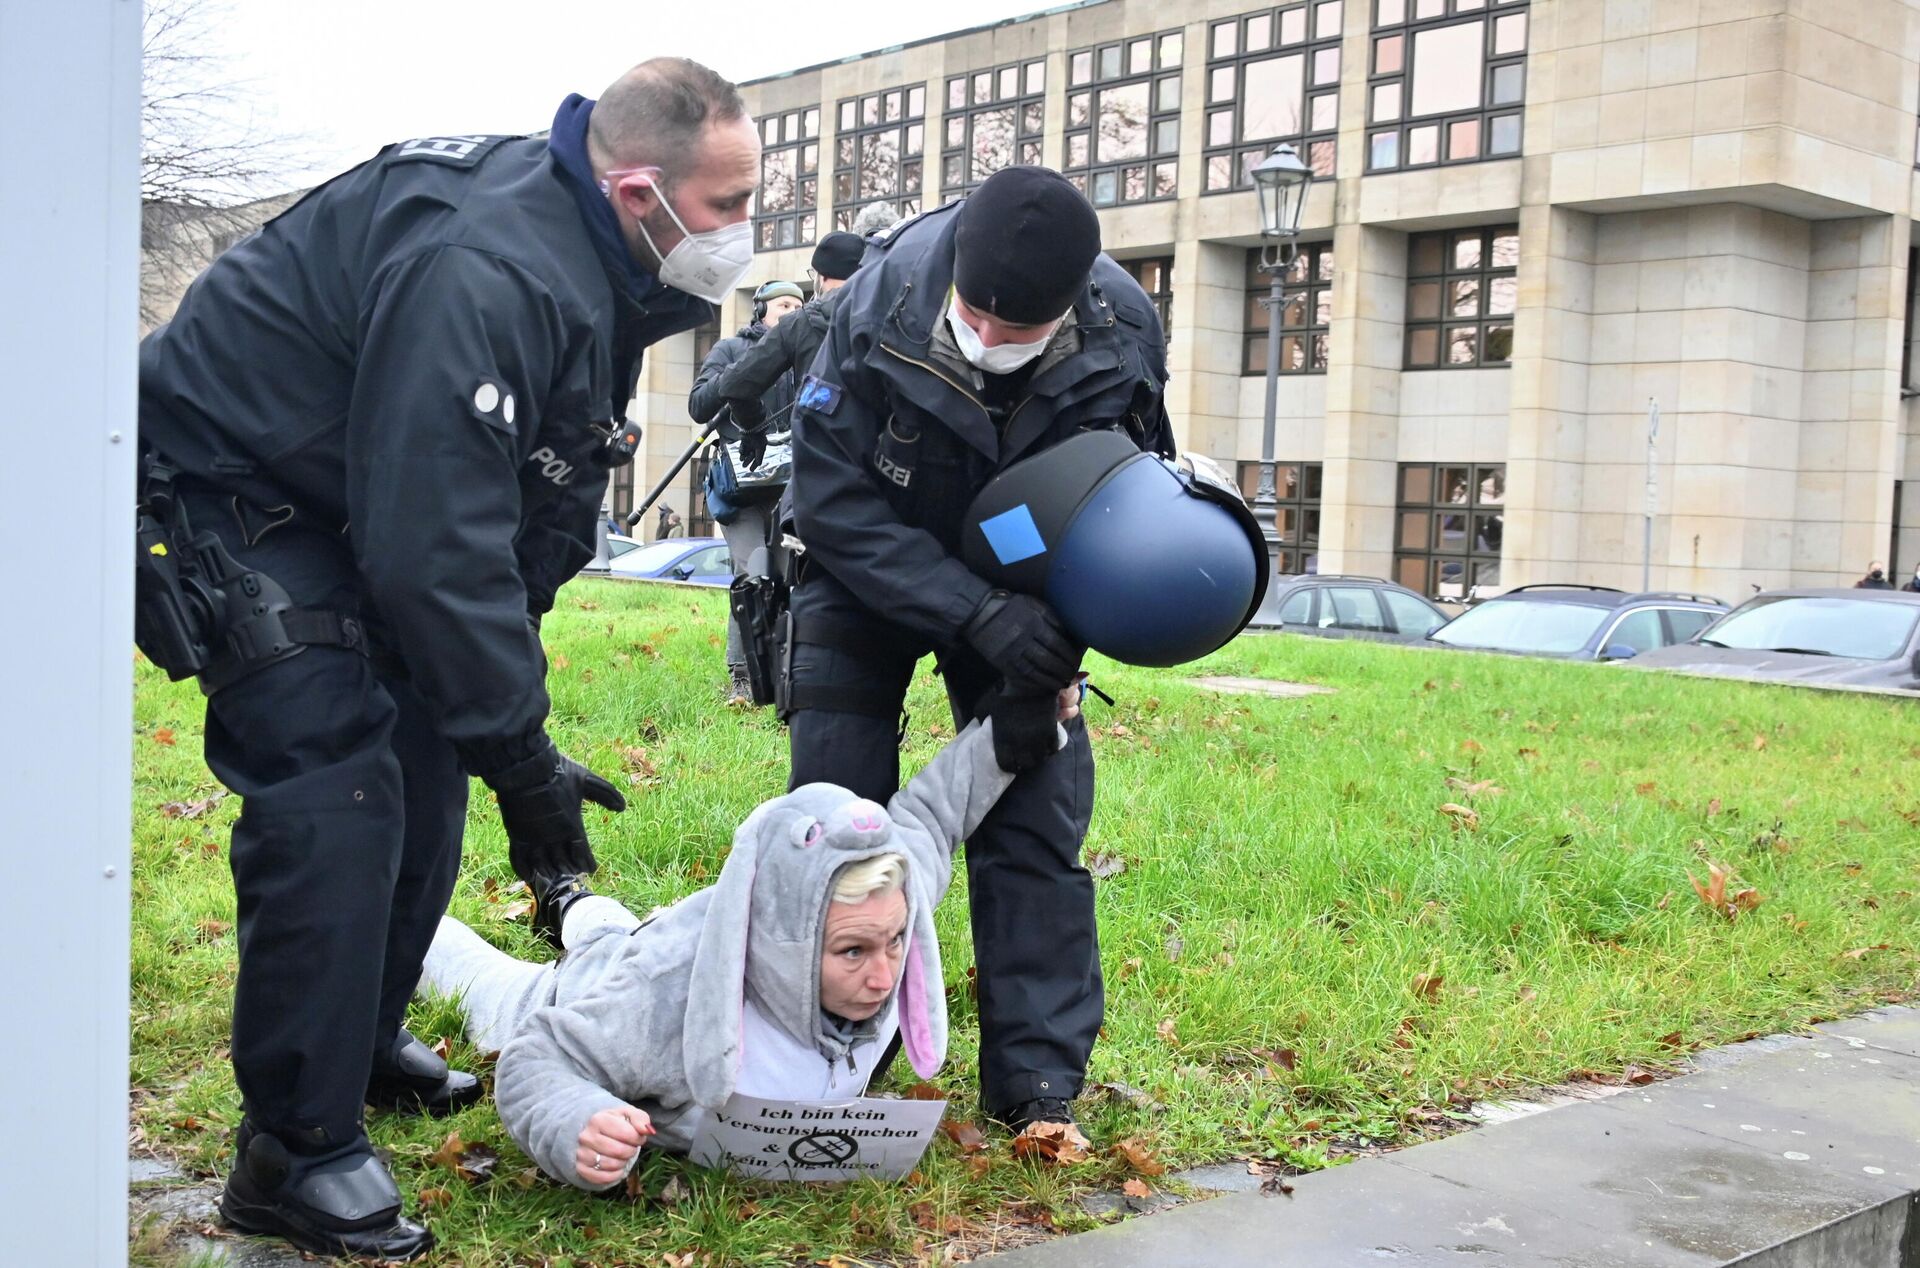 Police officers detain a demonstrator during a protest against government measures to curb the spread of the coronavirus disease (COVID-19) in Dresden, Germany, December 6, 2021 - Sputnik International, 1920, 31.12.2021